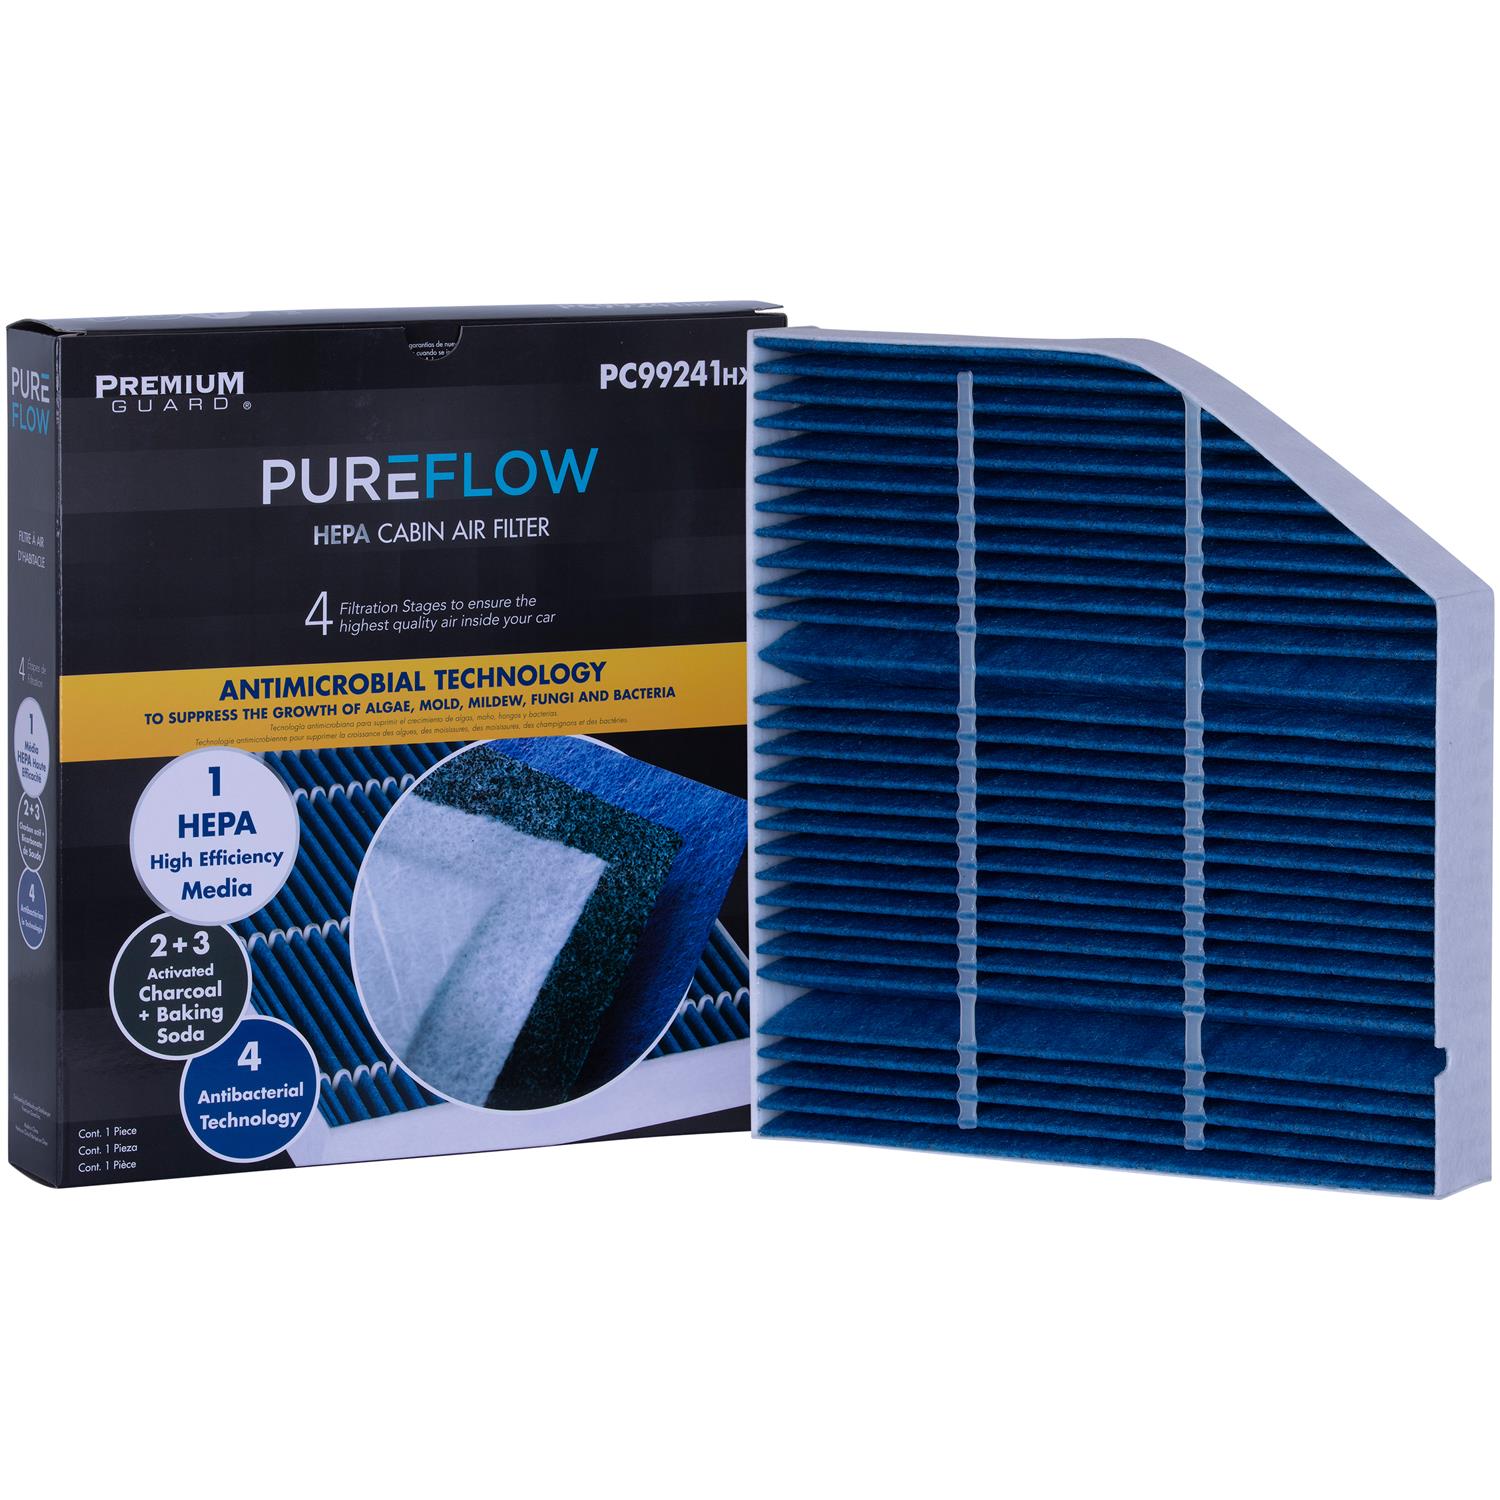 PUREFLOW 2015 Mercedes-Benz C63 AMG S Cabin Air Filter with HEPA and Antibacterial Technology, PC99241HX